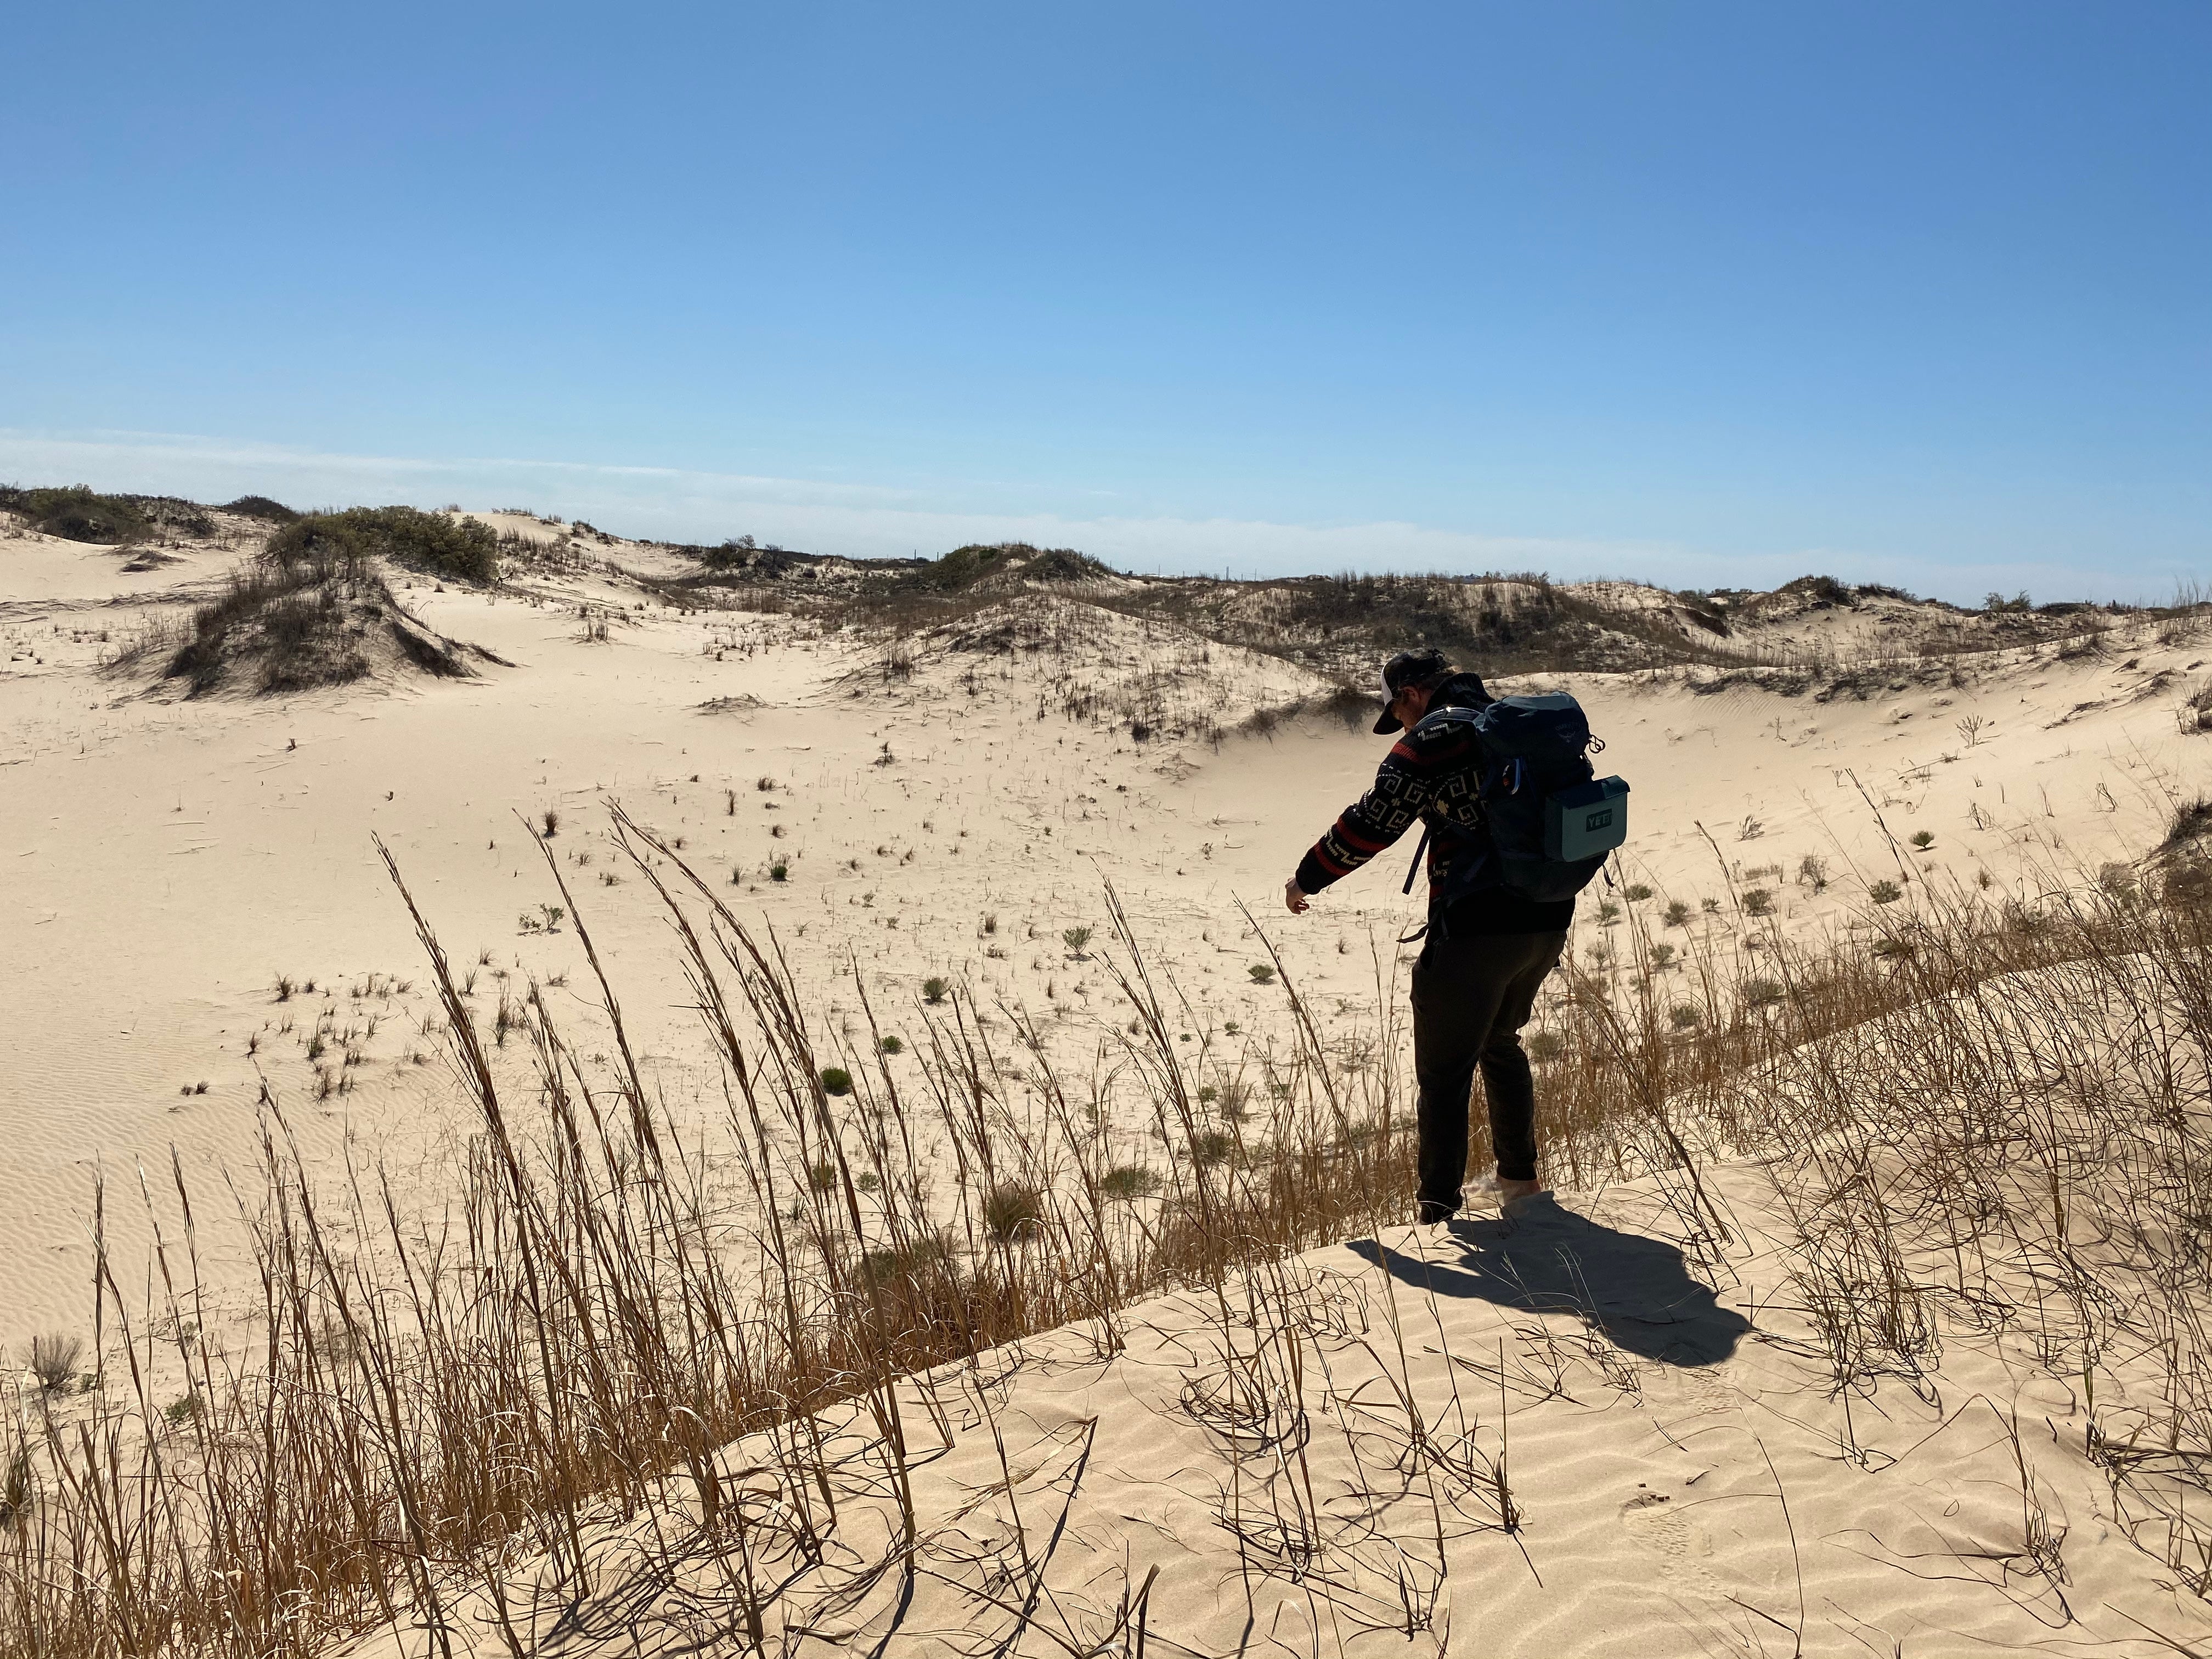 Checking out the dunes